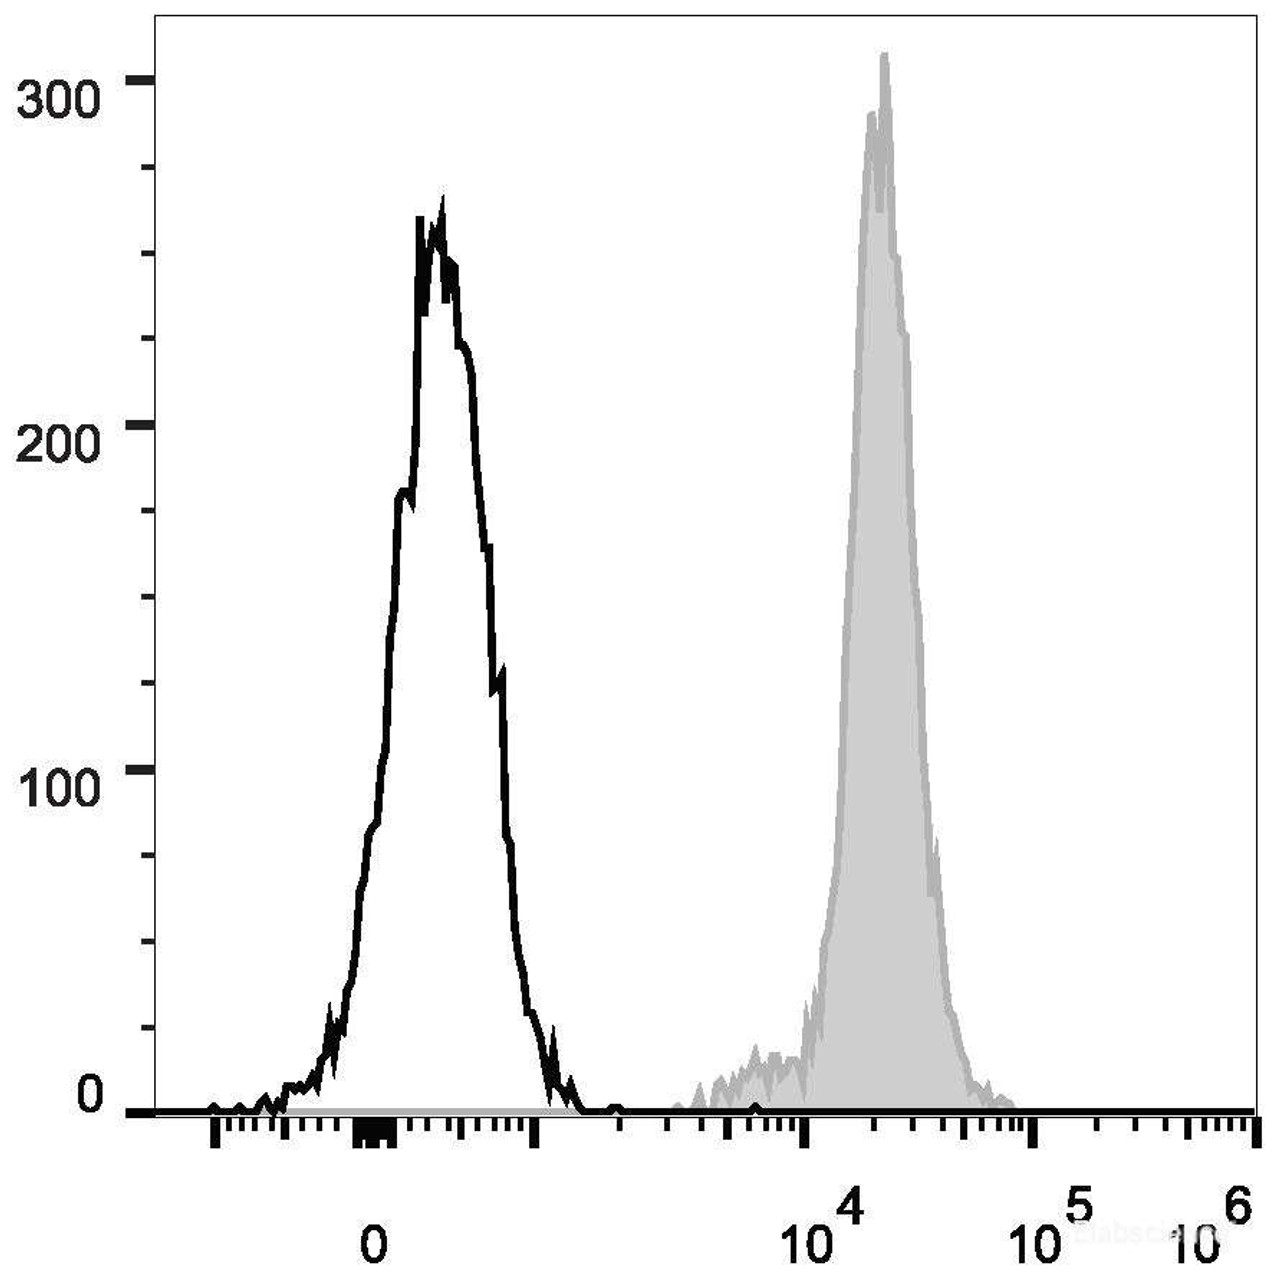 C57BL/6 murine splenocytes are stained with FITC Anti-Human/Mouse/Rat CD47 Antibody[Used at .2 μg/1<sup>6</sup> cells dilution](filled gray histogram). Unstained splenocytes (empty black histogram) are used as control.